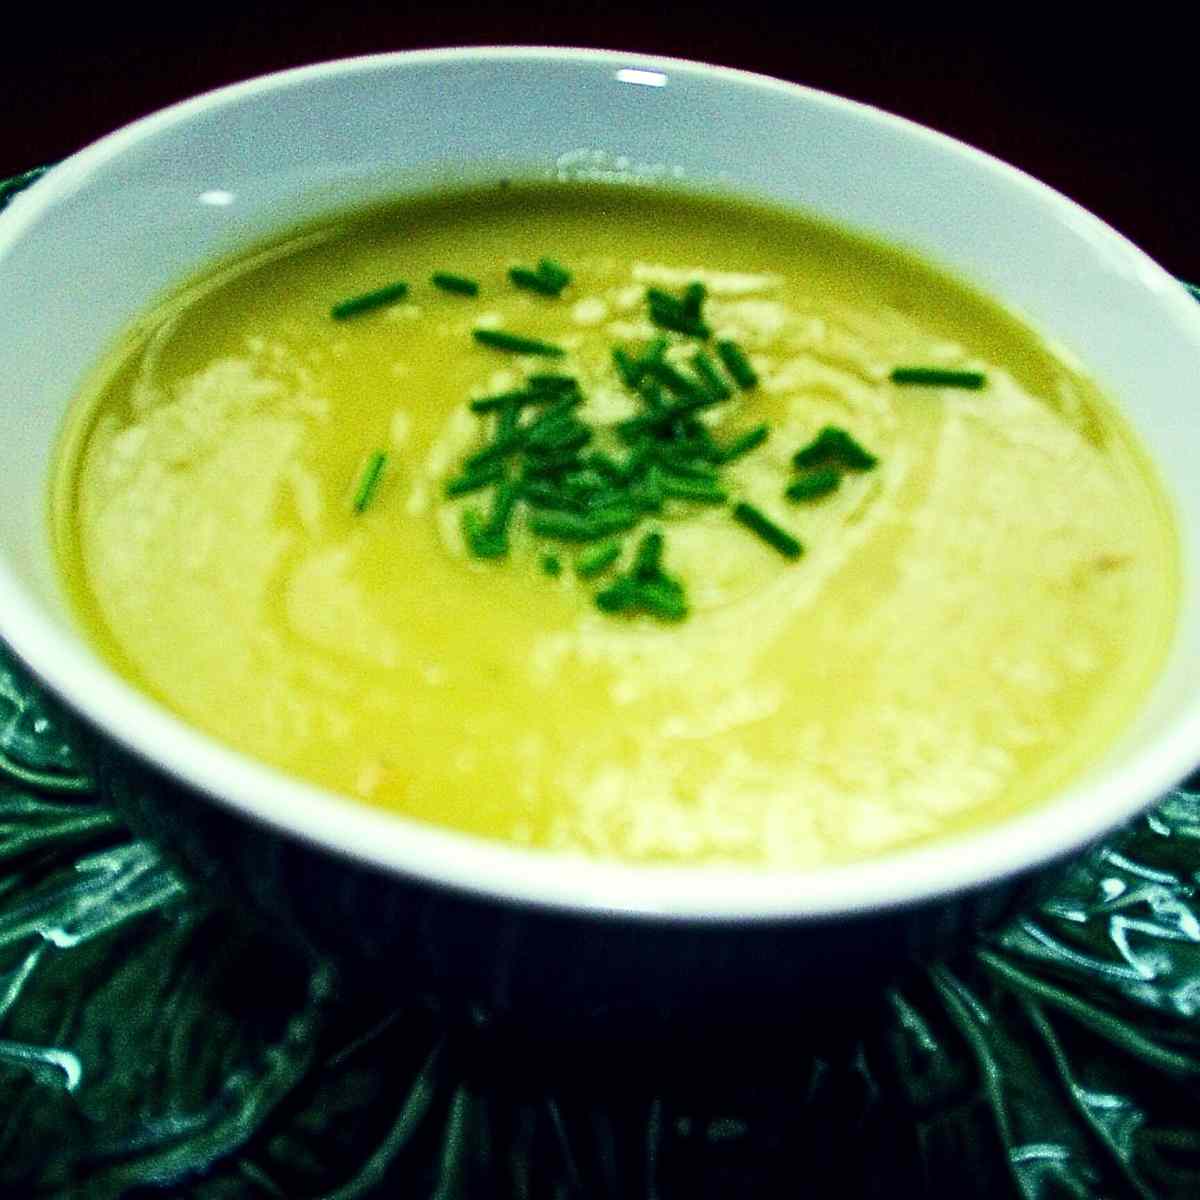 A white soup bowl filled with a creamy light green soup of blended leeks and potatoes sprinkled with dark green chives.